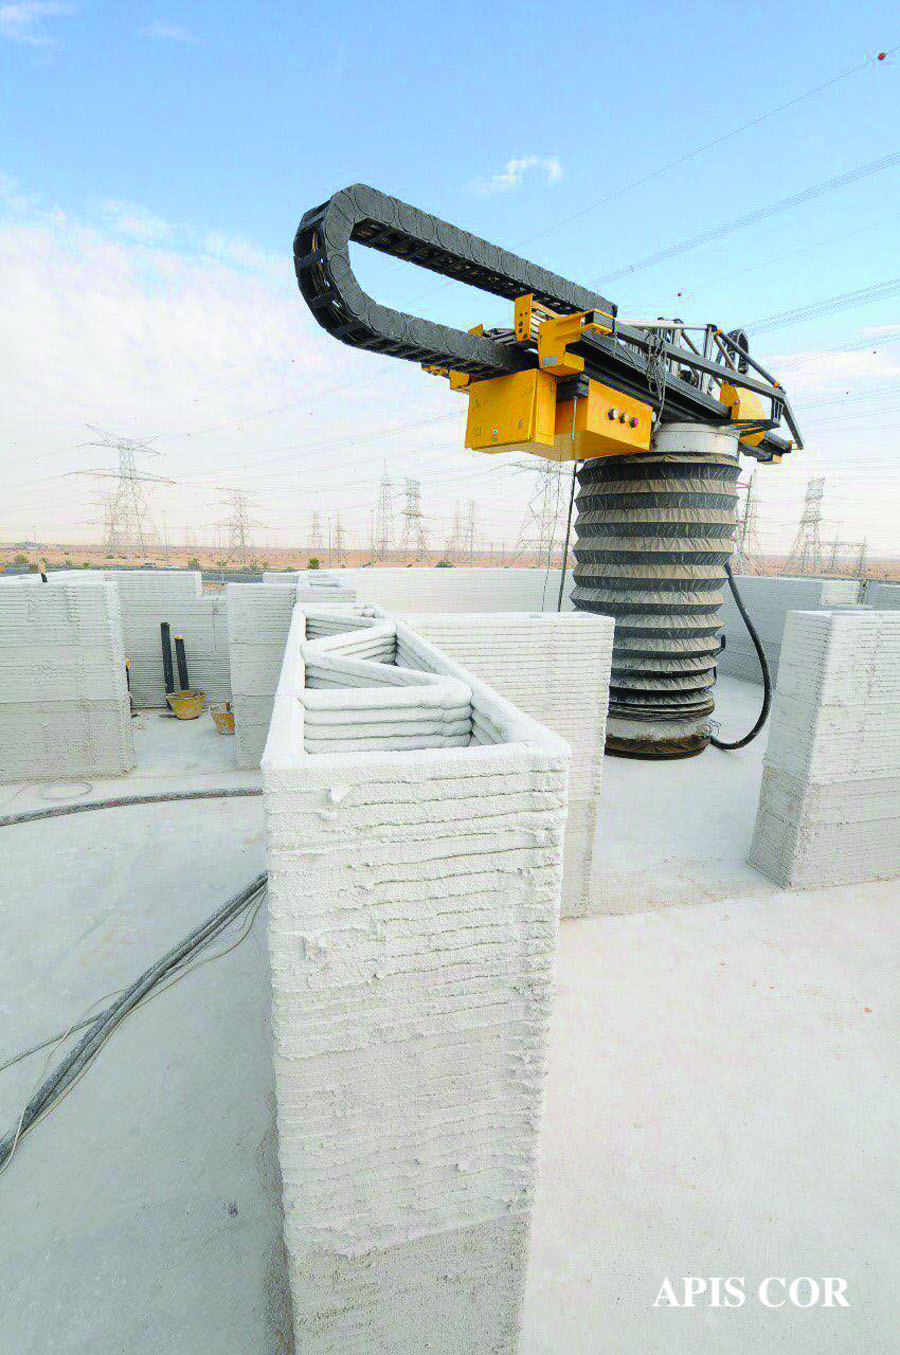 Also in Dubai, robotics company Apis Cor produced the world’s largest 3D-printed building in 2019, a 6,890-square-foot structure for the Dubai Municipality. A single machine printed the gypsum walls and columns, which were later reinforced with concrete and rebar. Courtesy Apis Cor